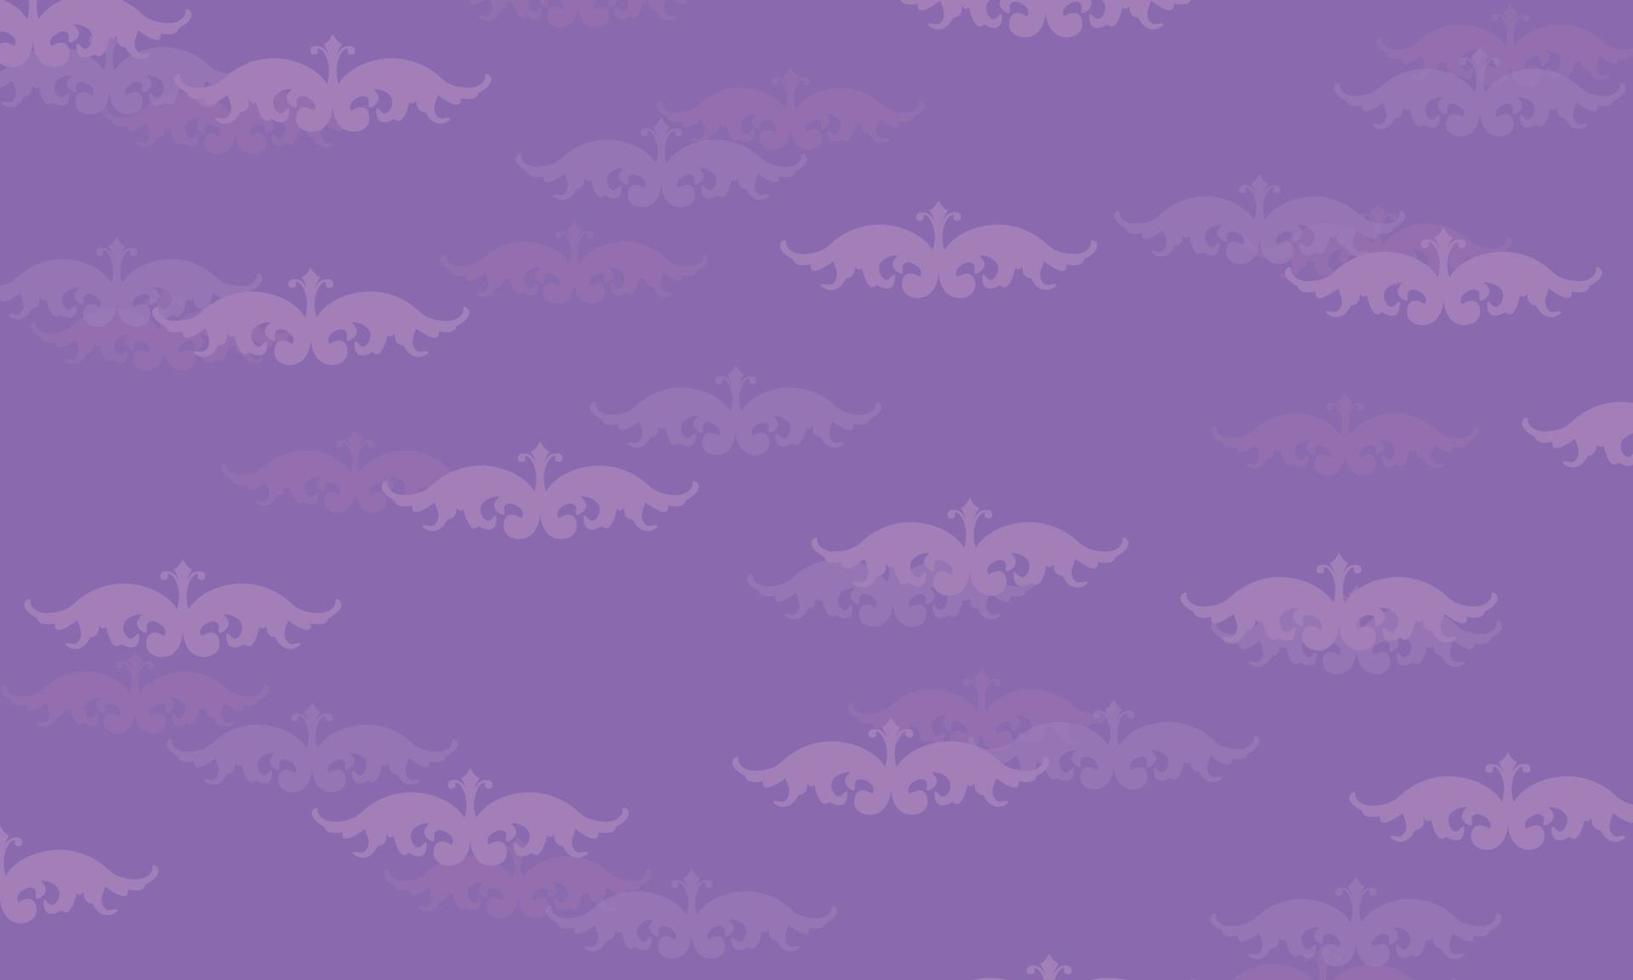 Light purple with balinese carving pattern. vector